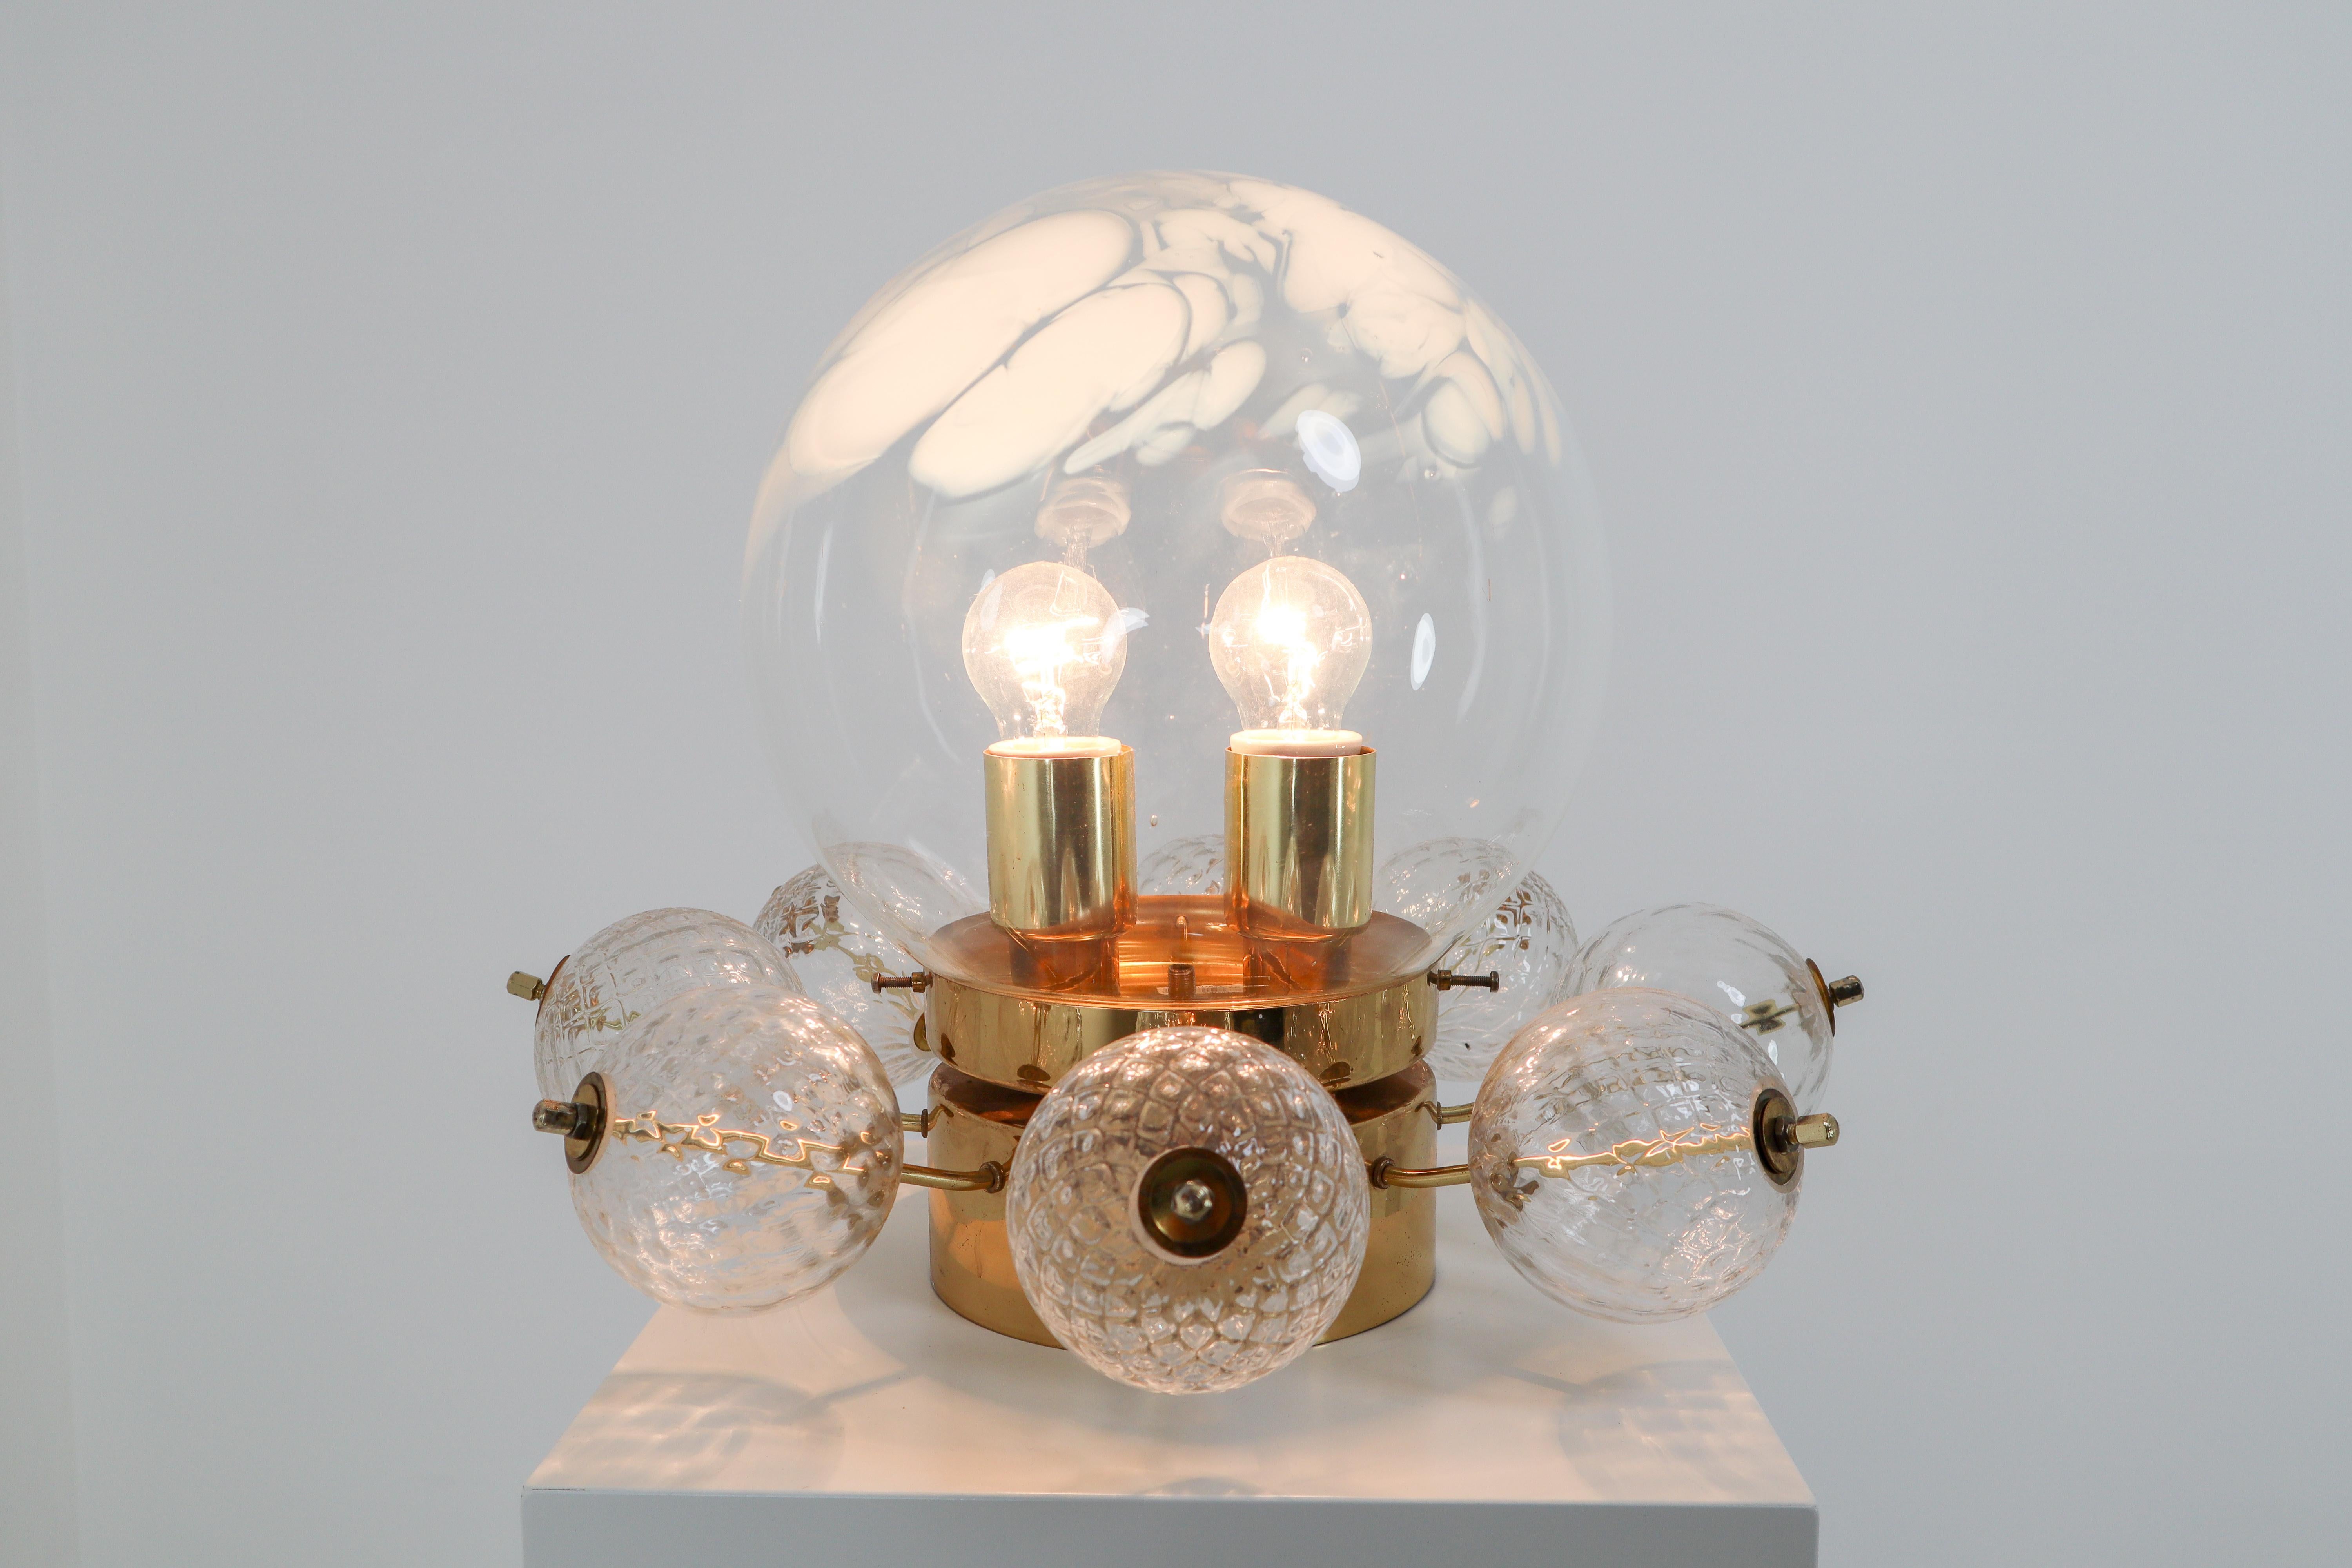 Large ceiling lamp-chandelier with brass base and large handblown art-glass globe. These clear handblown glass globe are decorated with white streaks. The globe show a different and unique semi transparent, diffuse surface, which looks wonderful.